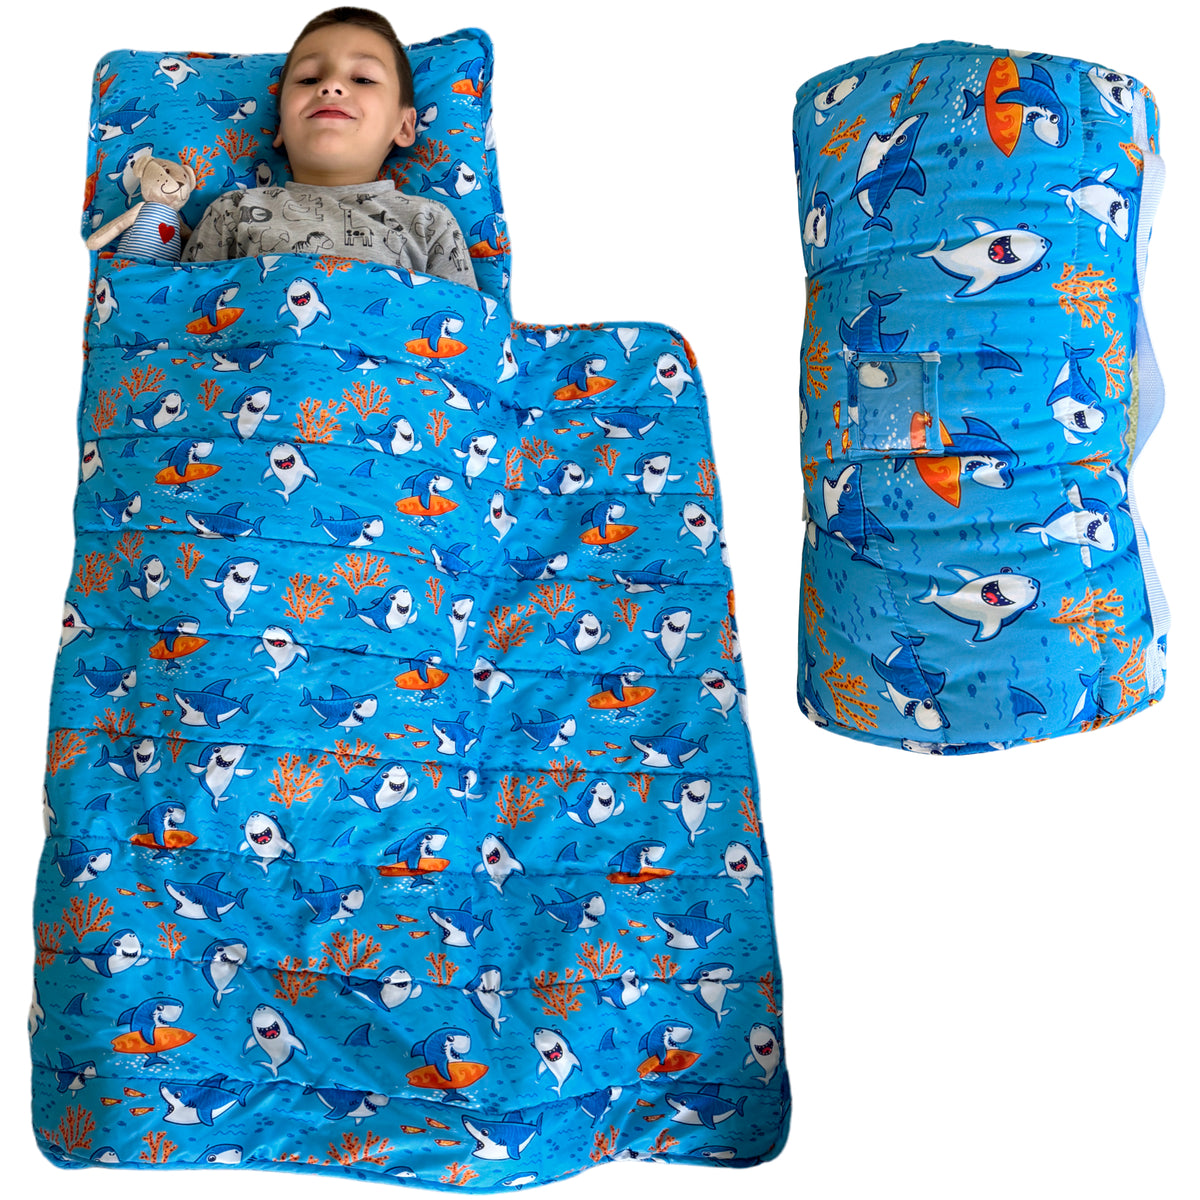 Toddler Nap Mat with Removable Pillow, Wide Blanket | 55" х 21" | Age 3-7 | Happy Shark